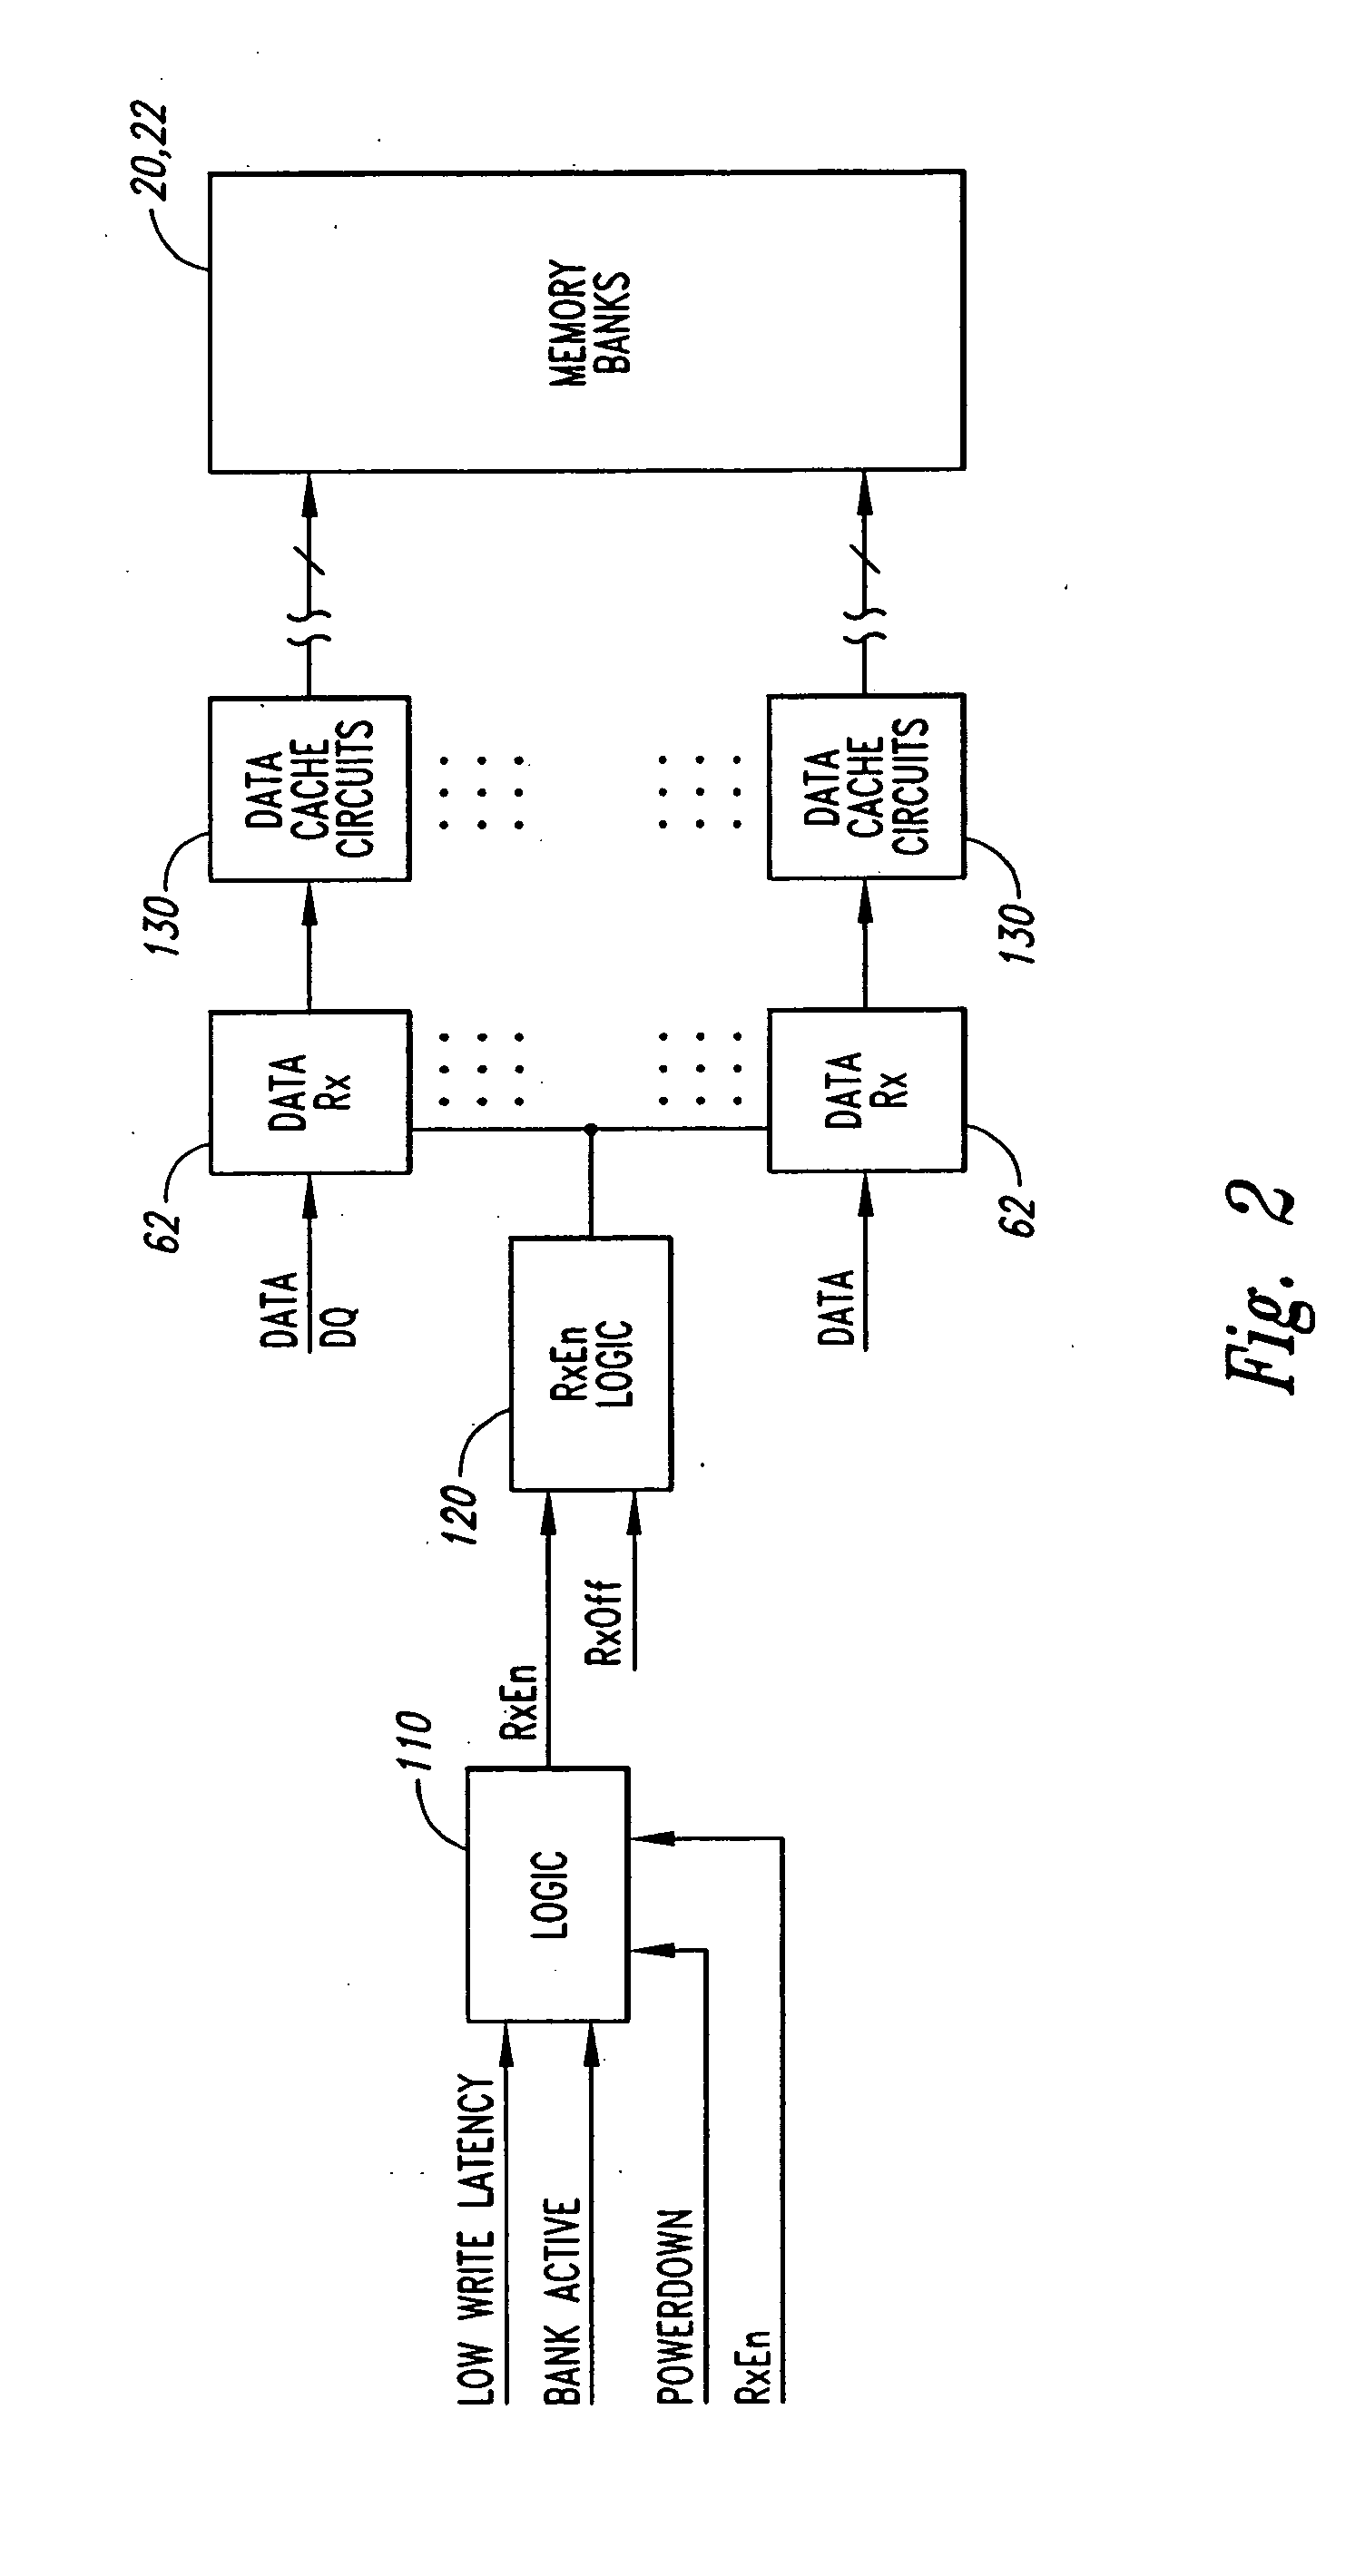 Memory device and method having low-power, high write latency mode and high-power, low write latency mode and/or independently selectable write latency